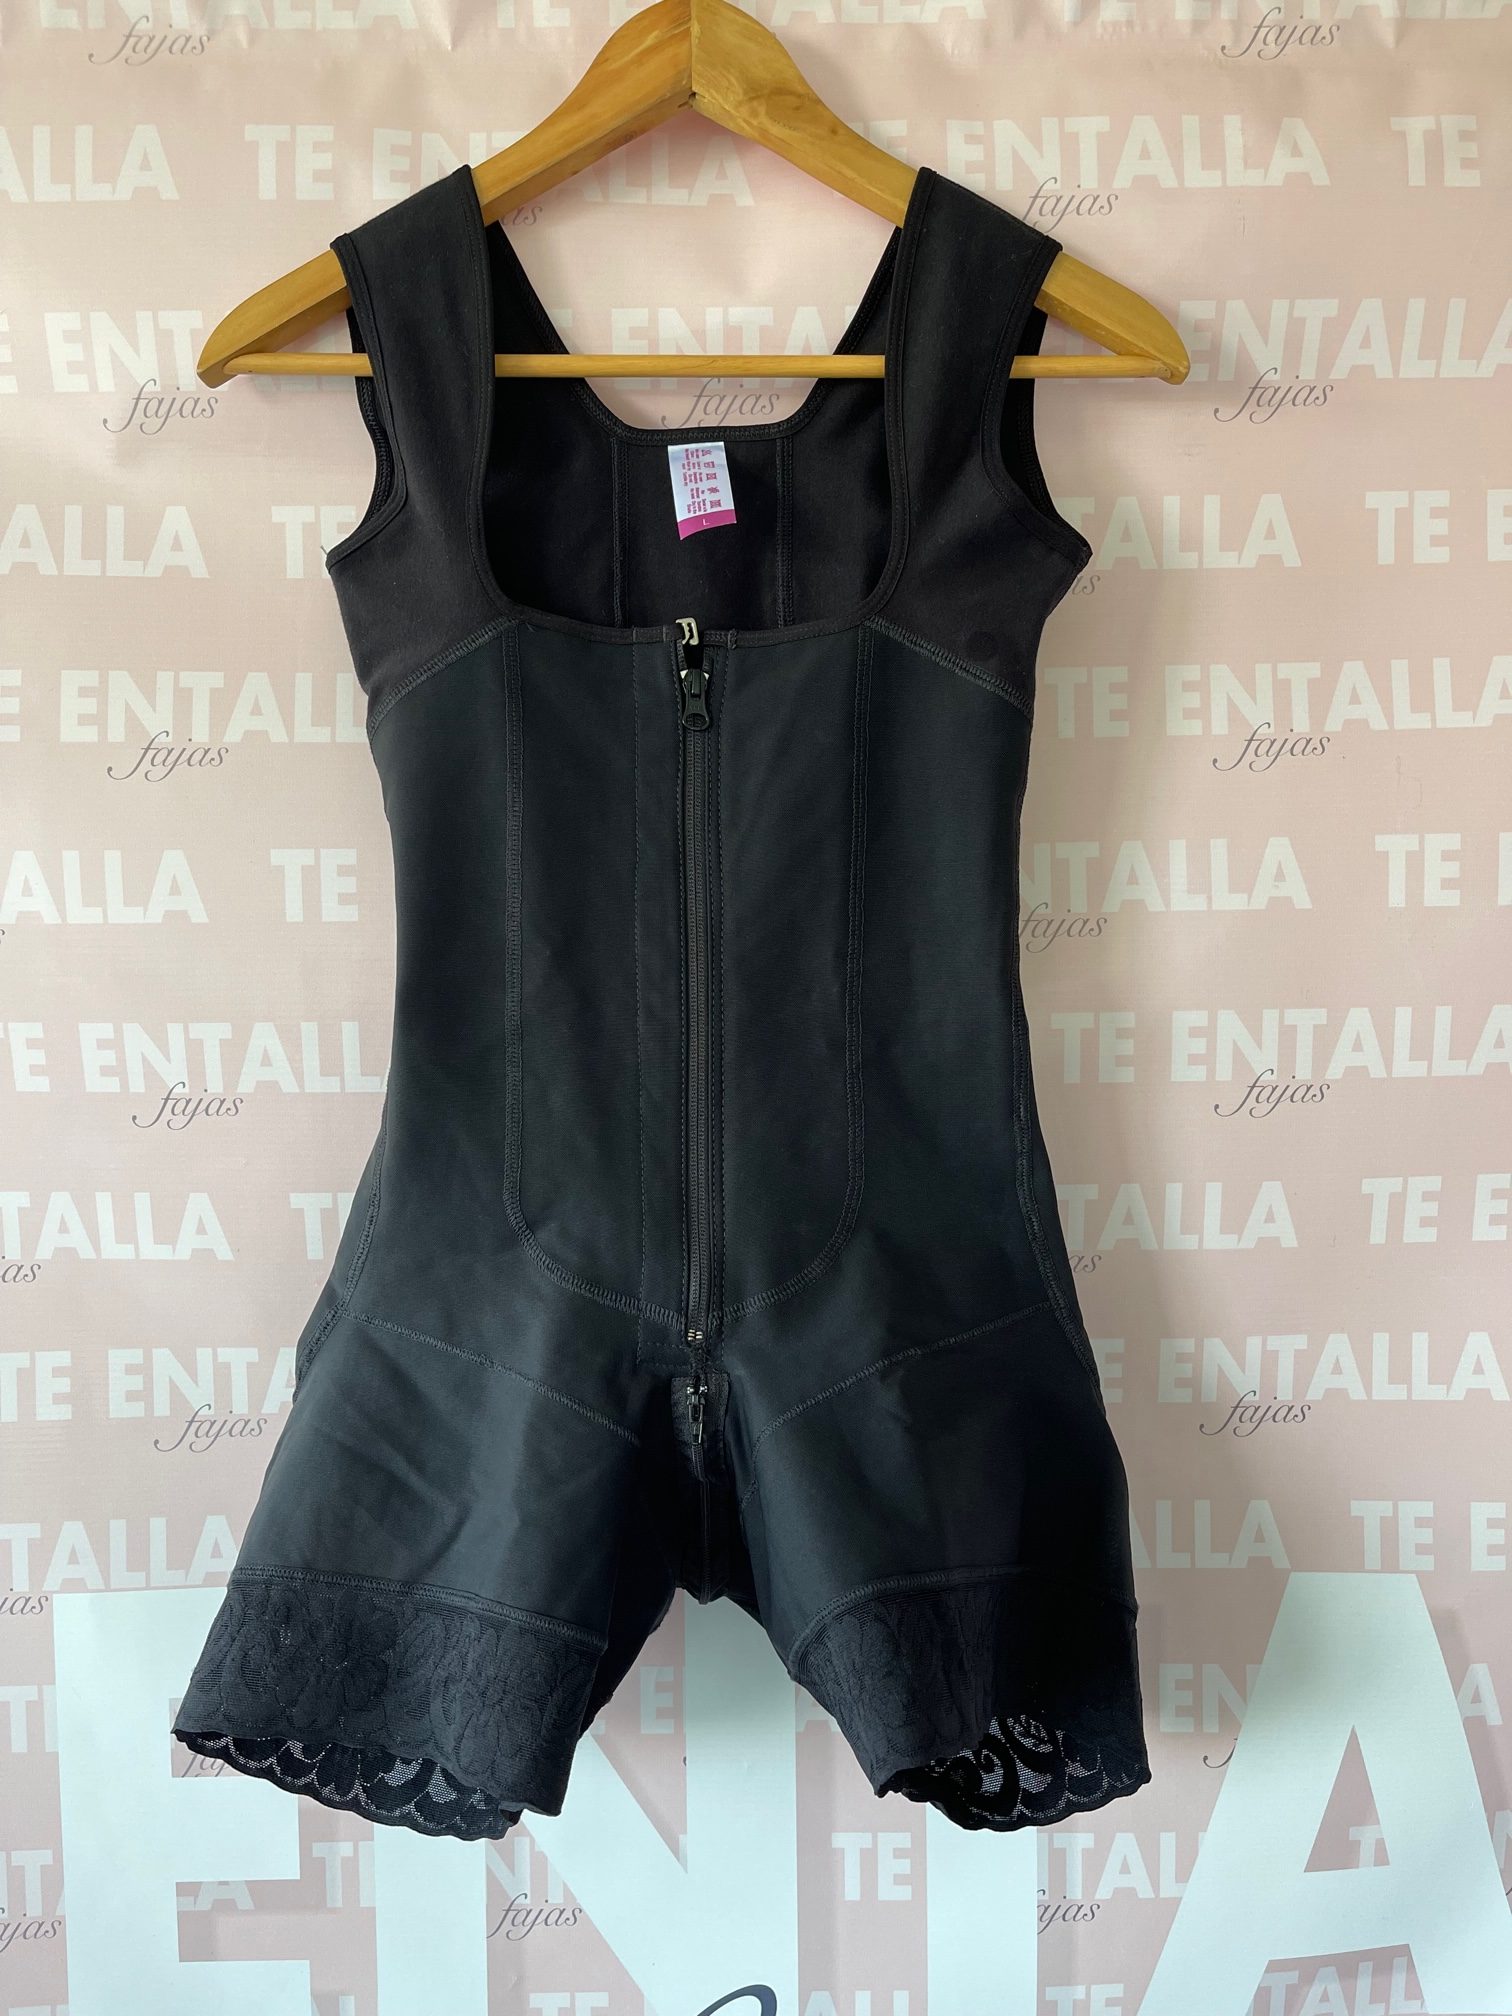 Body shaper with sleeves – Te Entalla